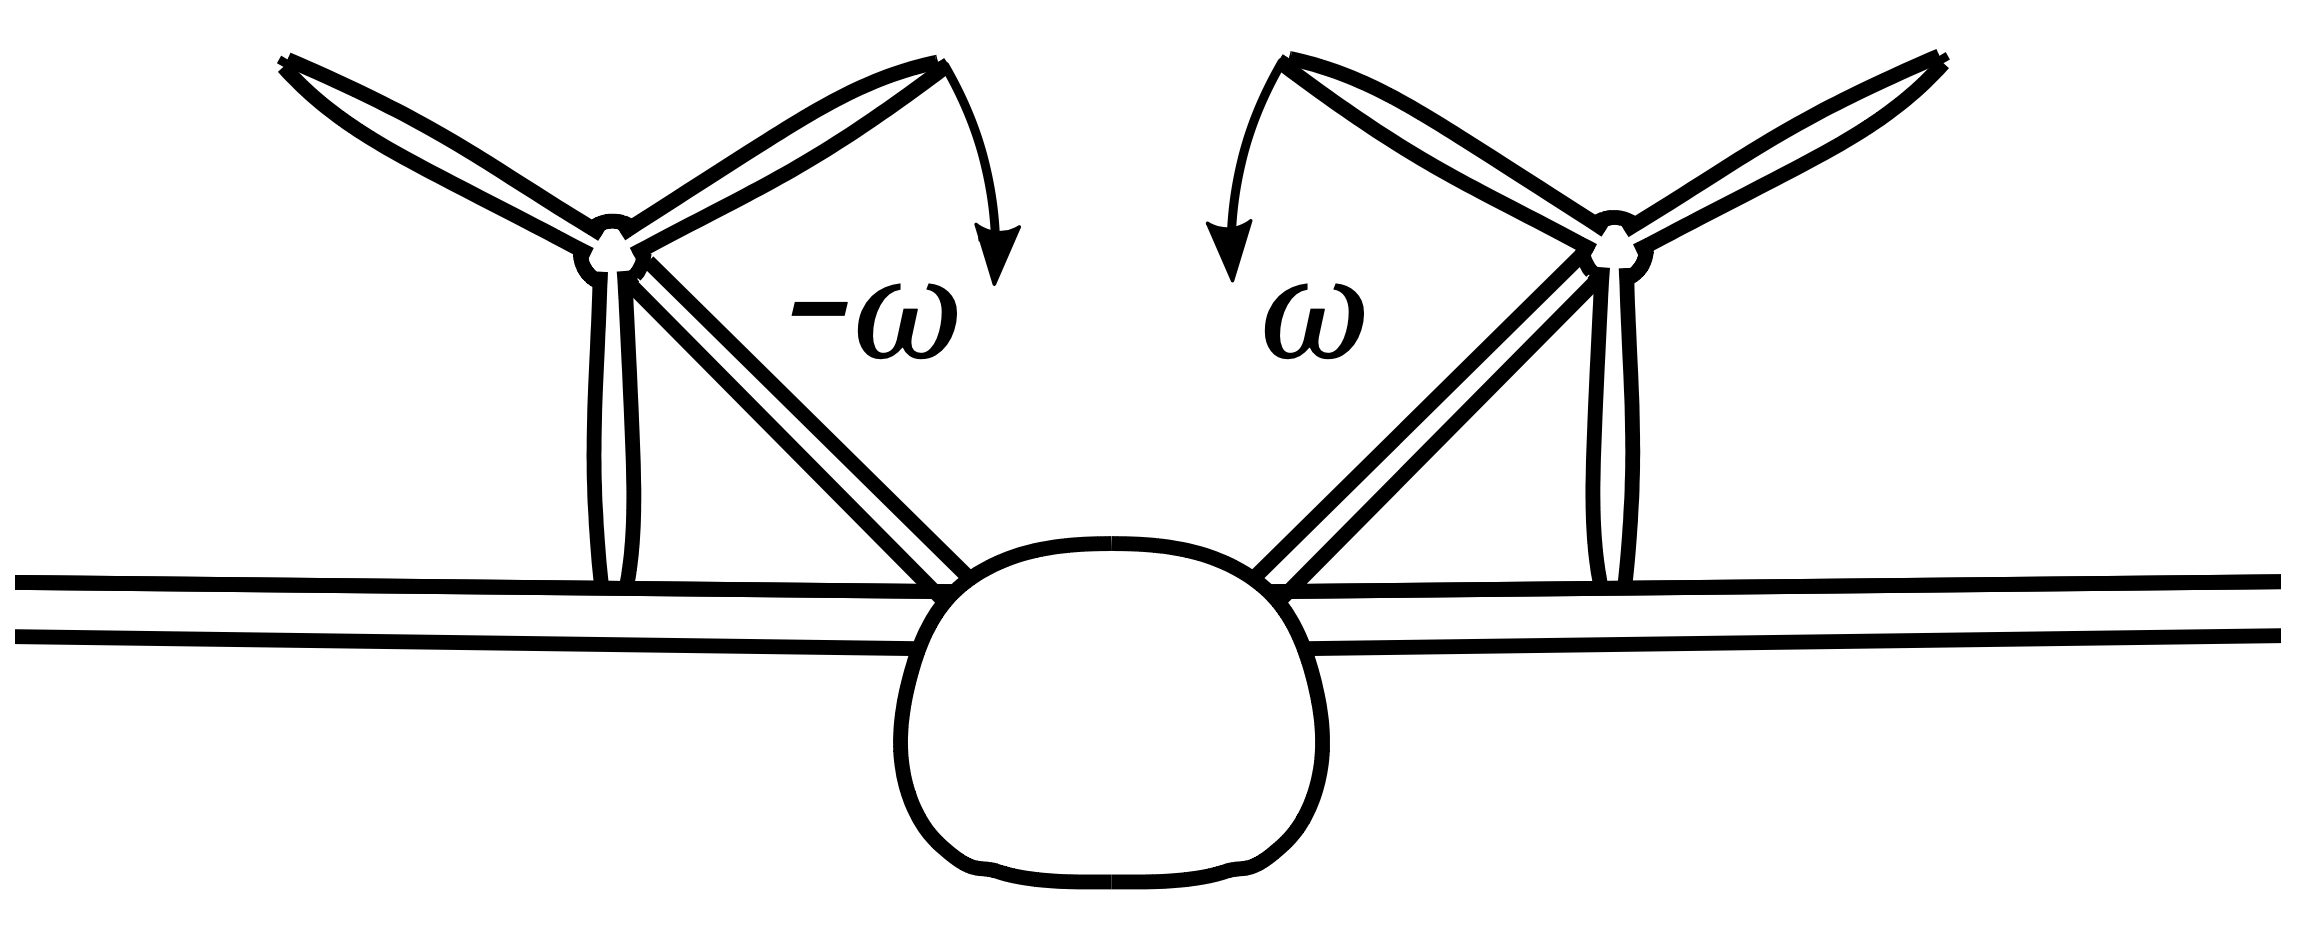 Propeller-Tail Interaction